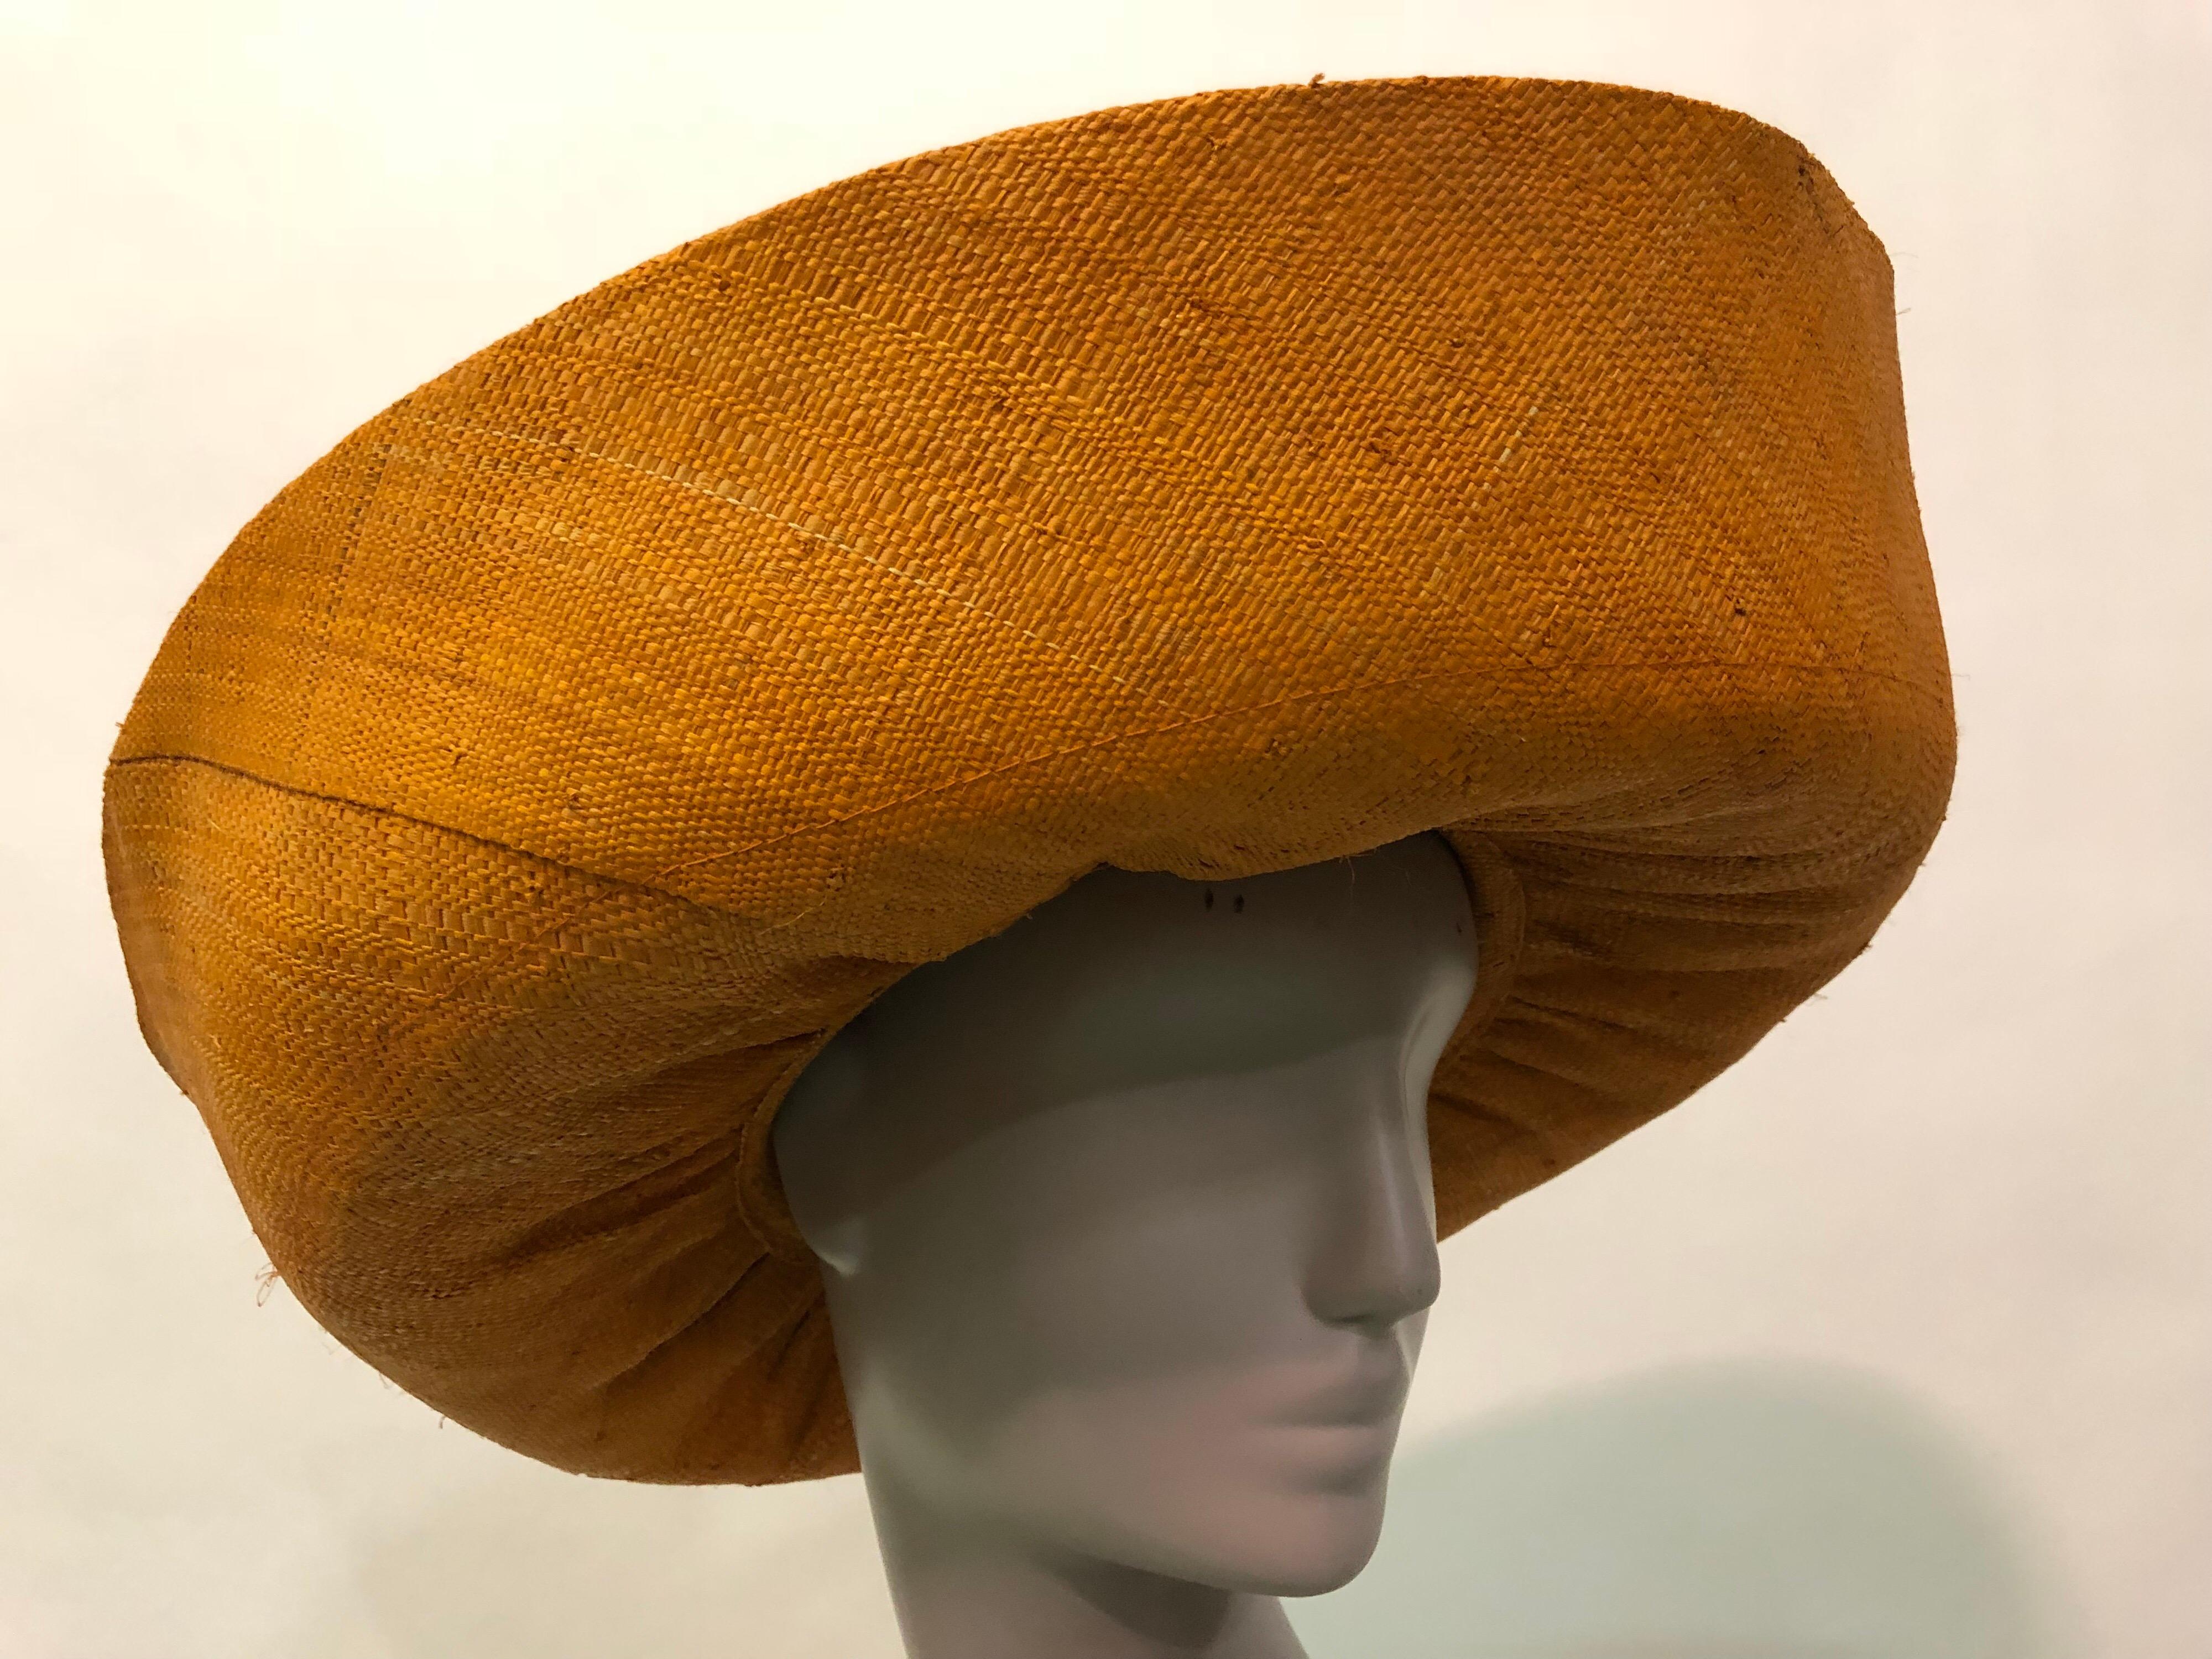 This dramatic orange woven straw hat is most likley from the 1980s 
Large turned up brim adds drama to this Summer sunhat . Vintage fruit corsage at the back of hat adds a twist of whimsy .
Fits up to a size large.